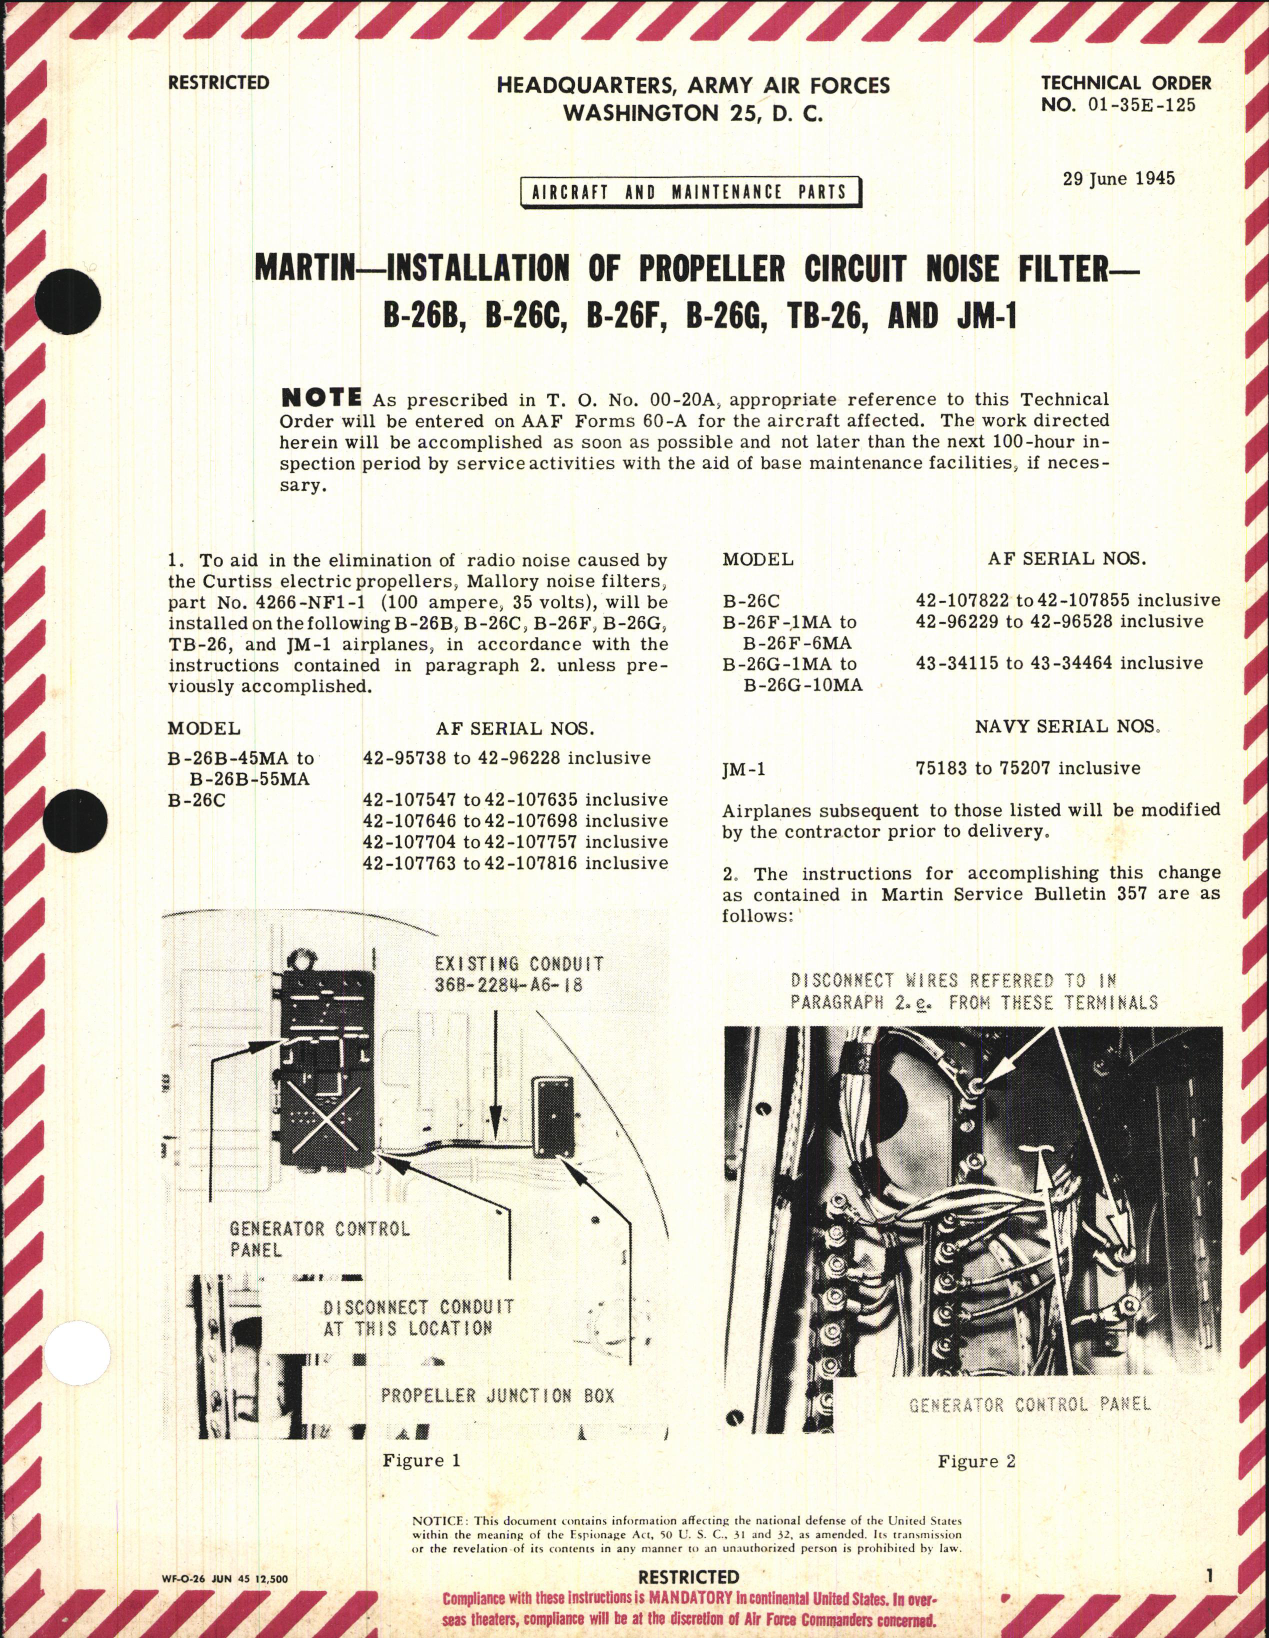 Sample page 1 from AirCorps Library document: Installation of Propeller Circuit Noise Filter for B-26B, B-26C, B-26F, B-26G, TB-26, and JM-1